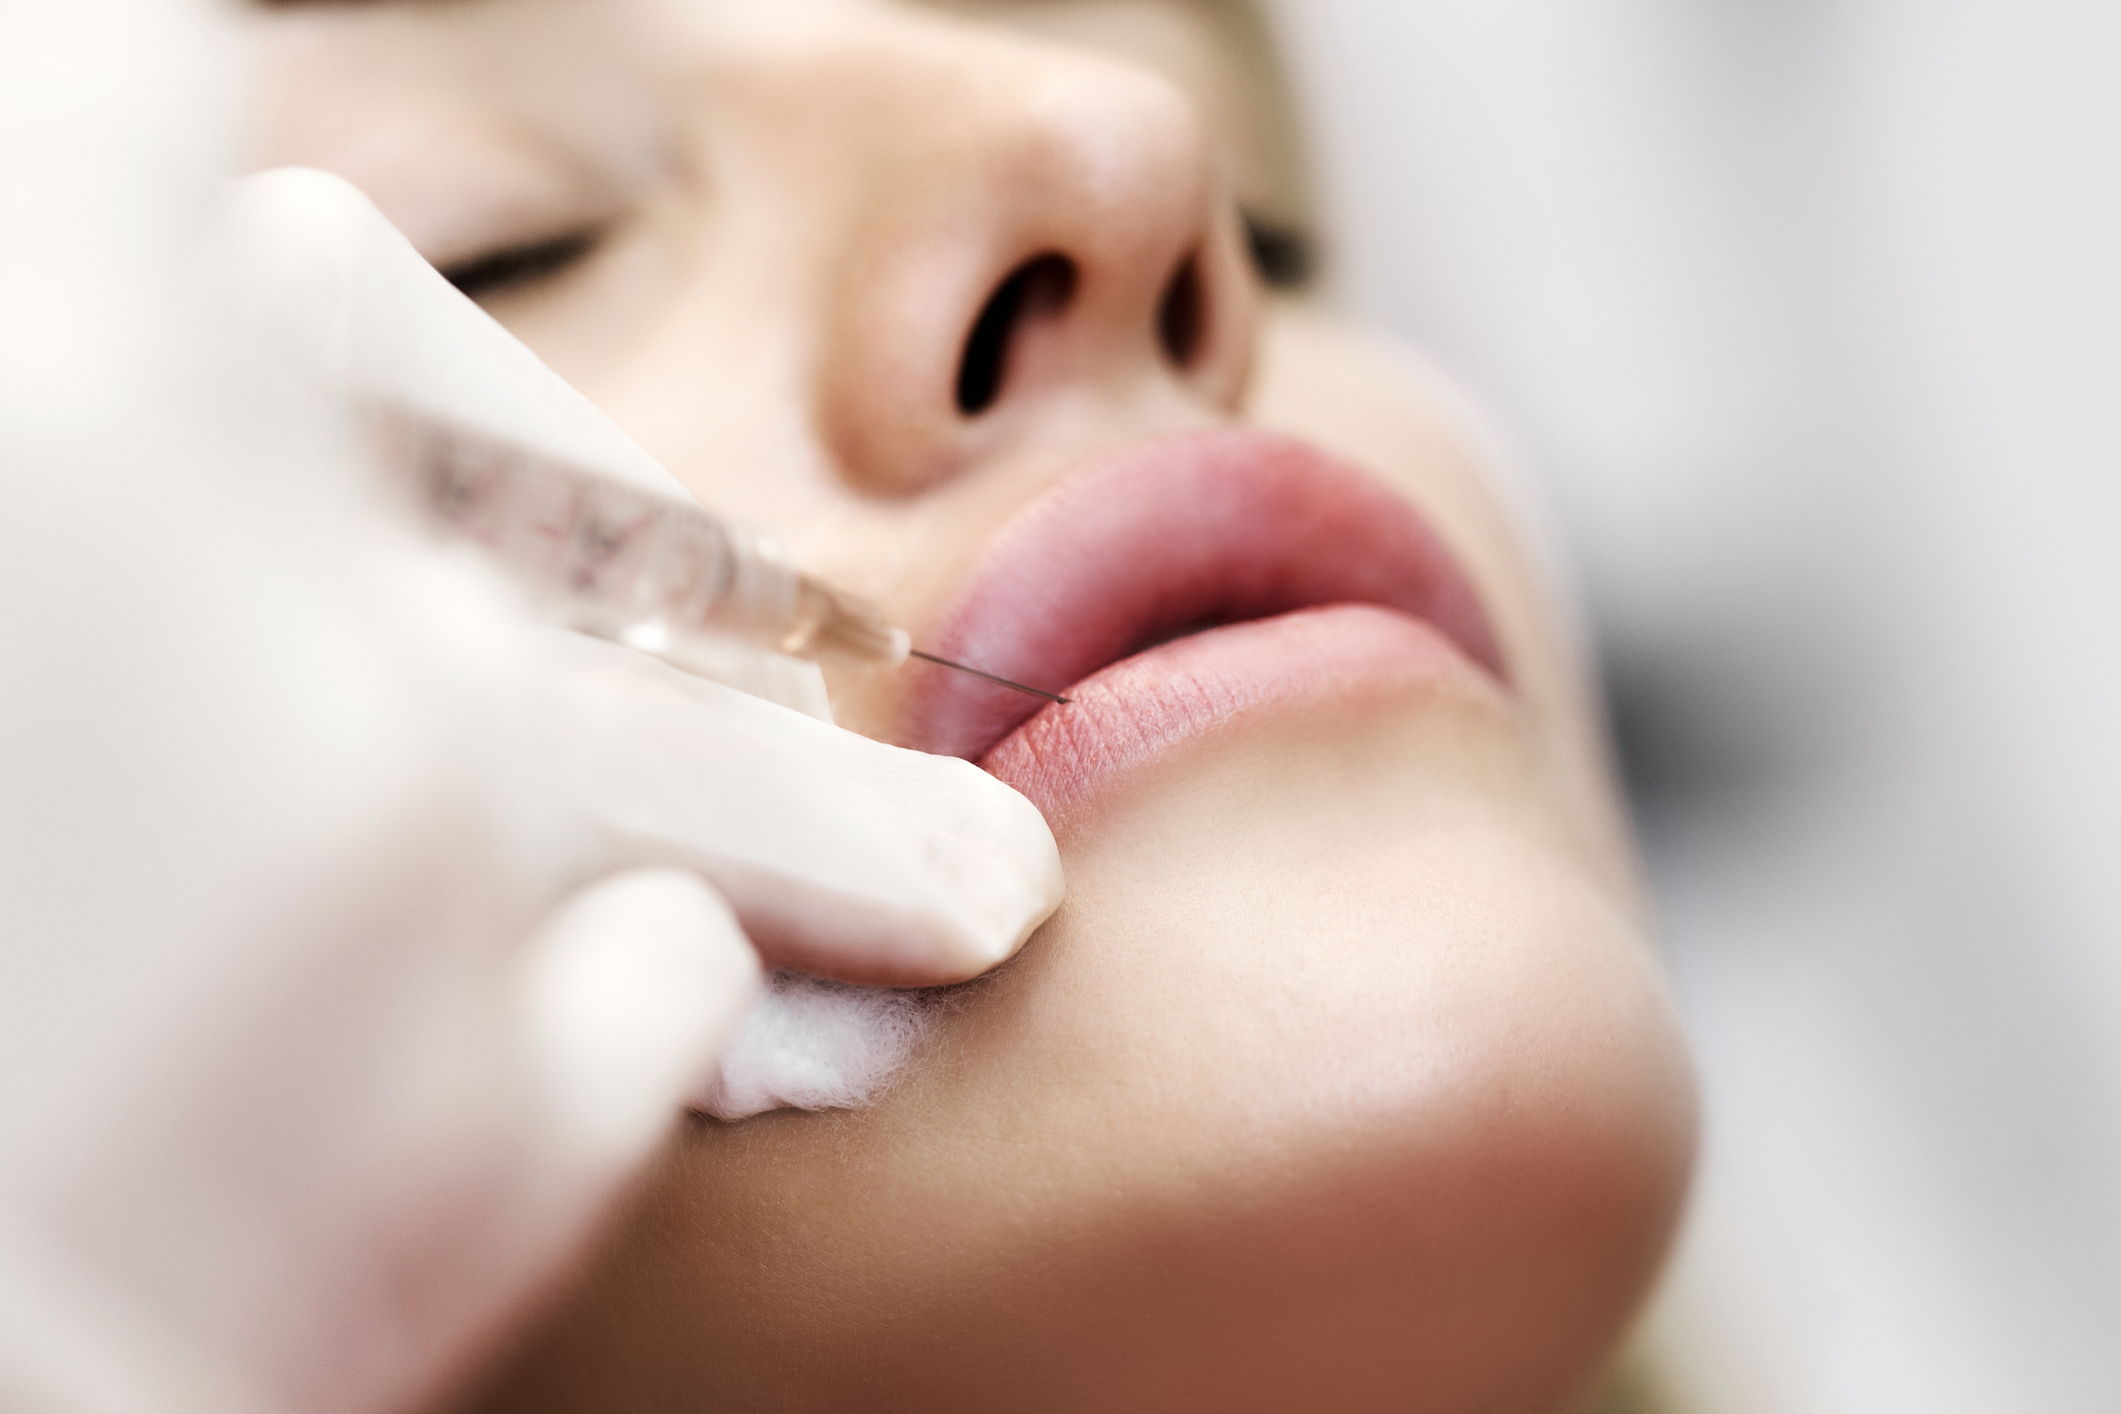 Professional cosmetologist injecting silicone in lips - Botox